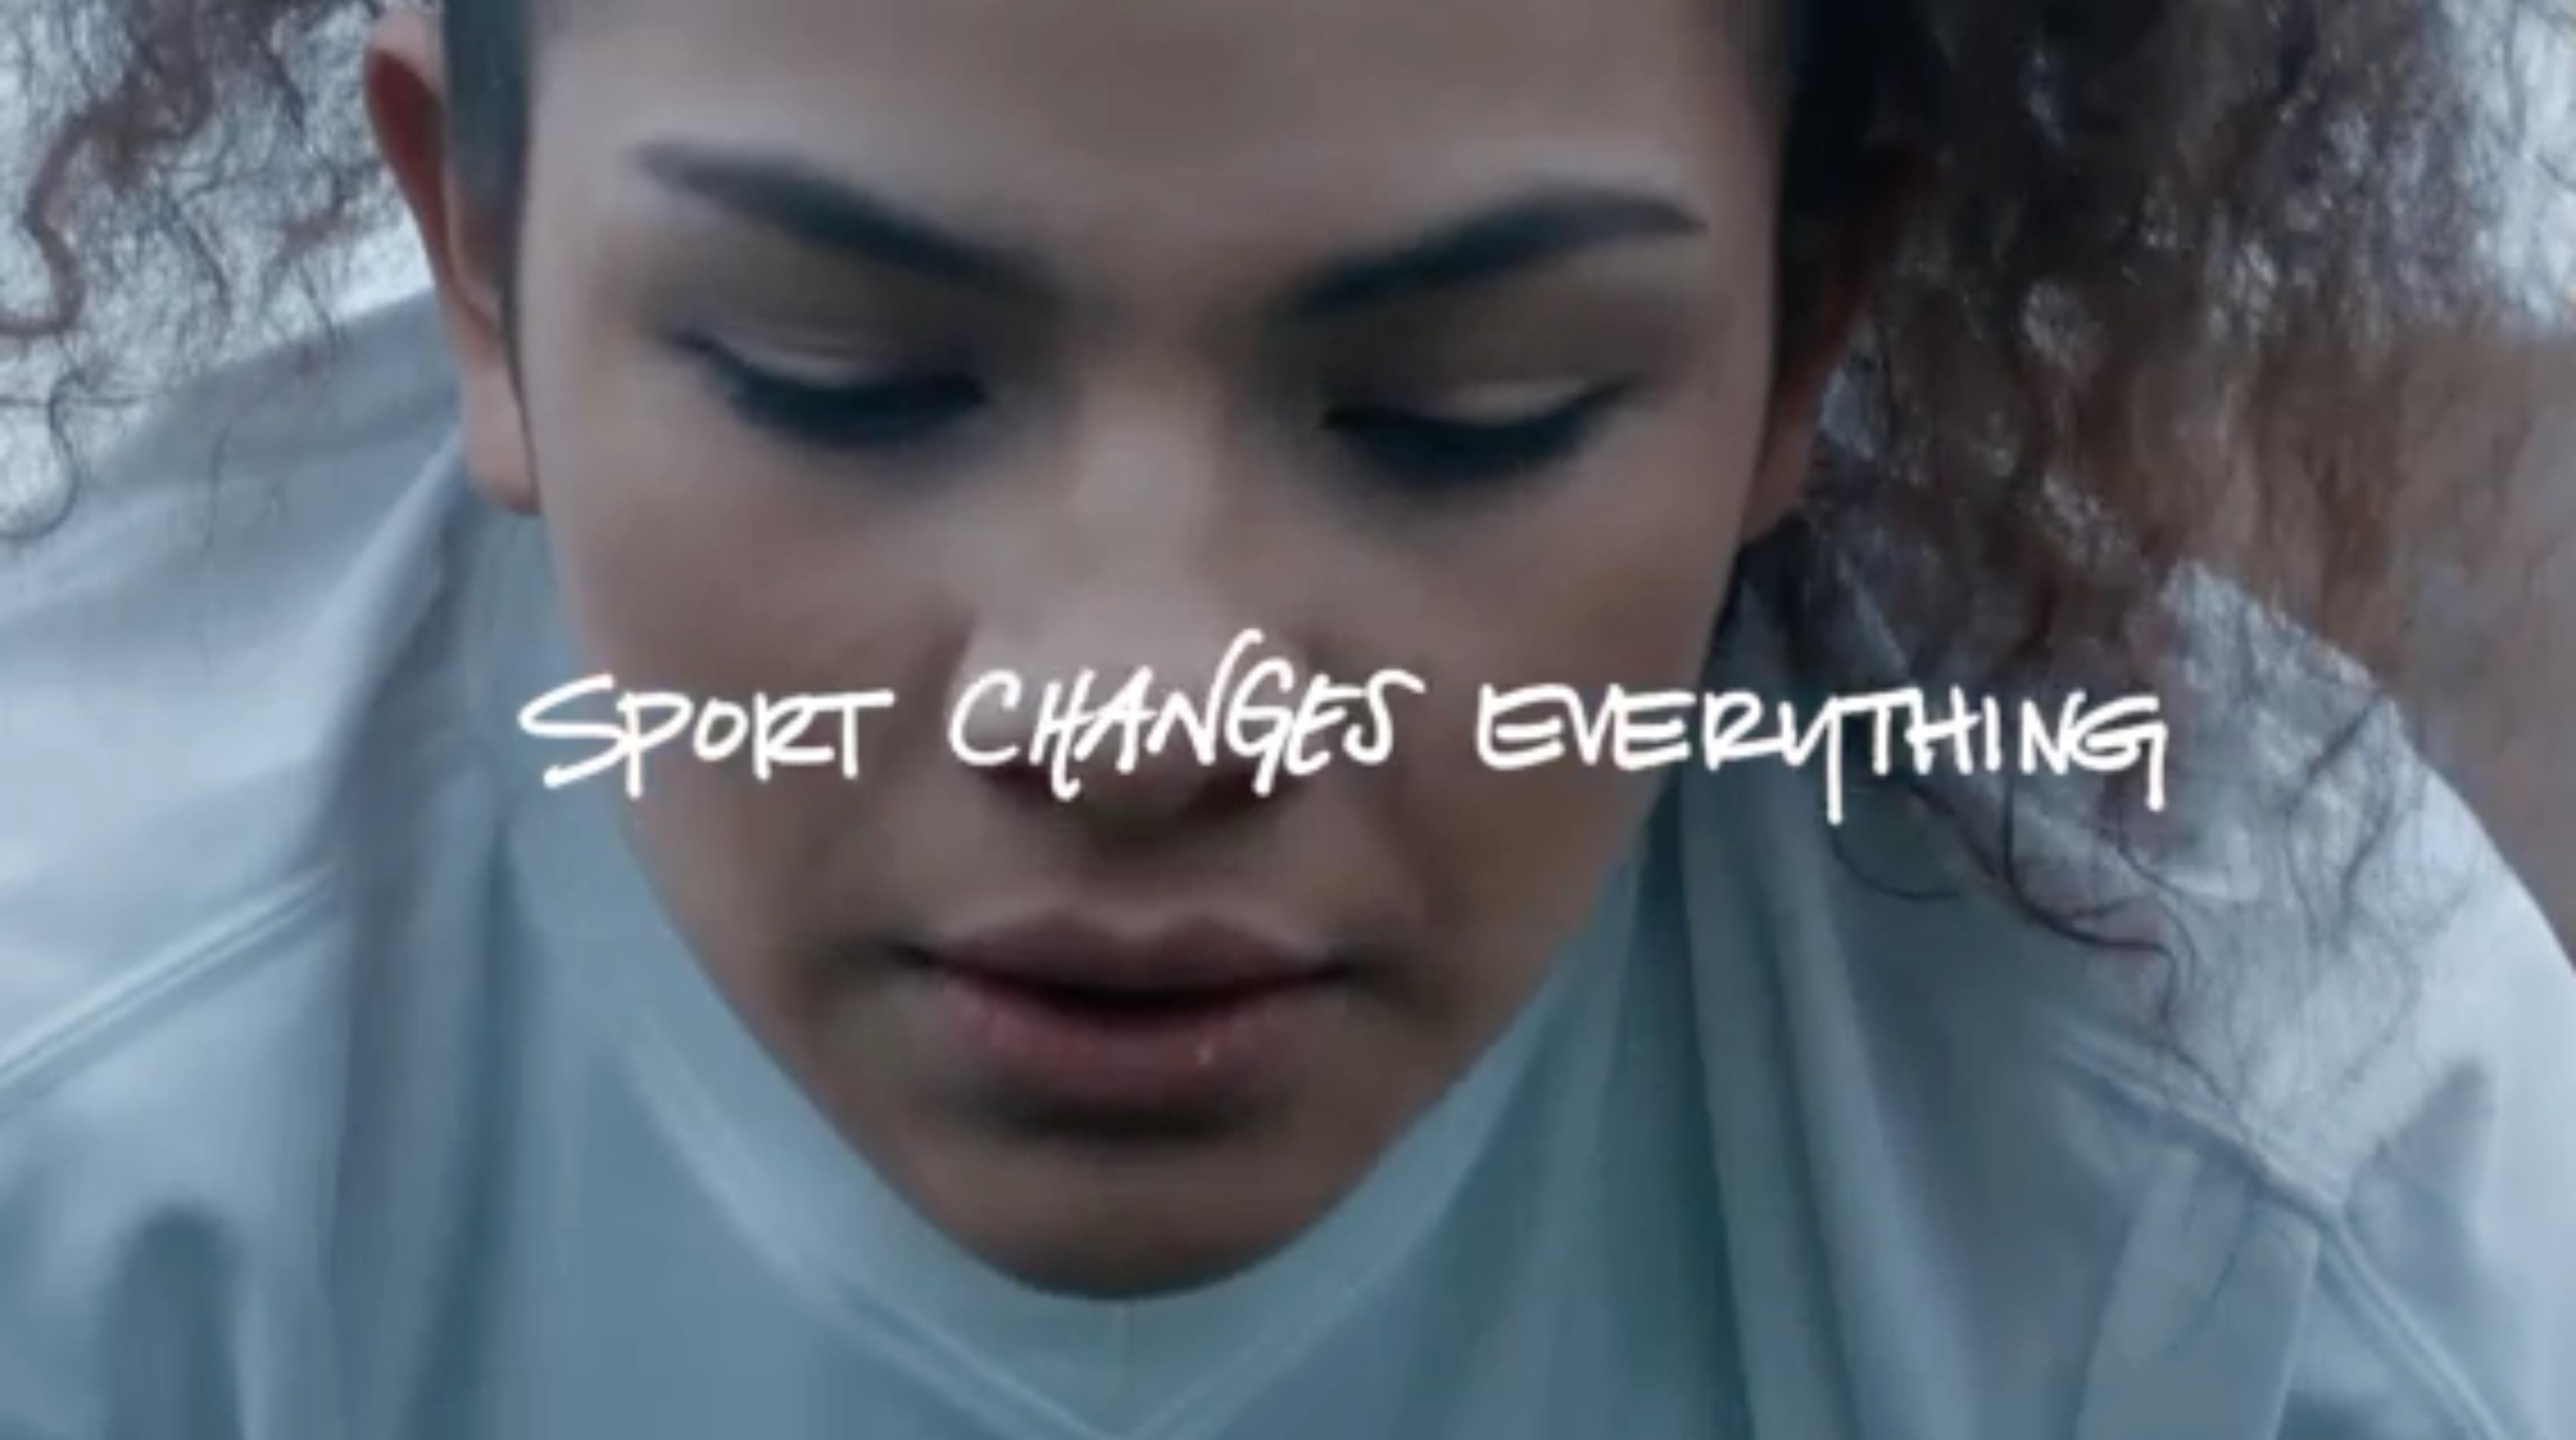 Nike Chicago: Sport Changes Everything